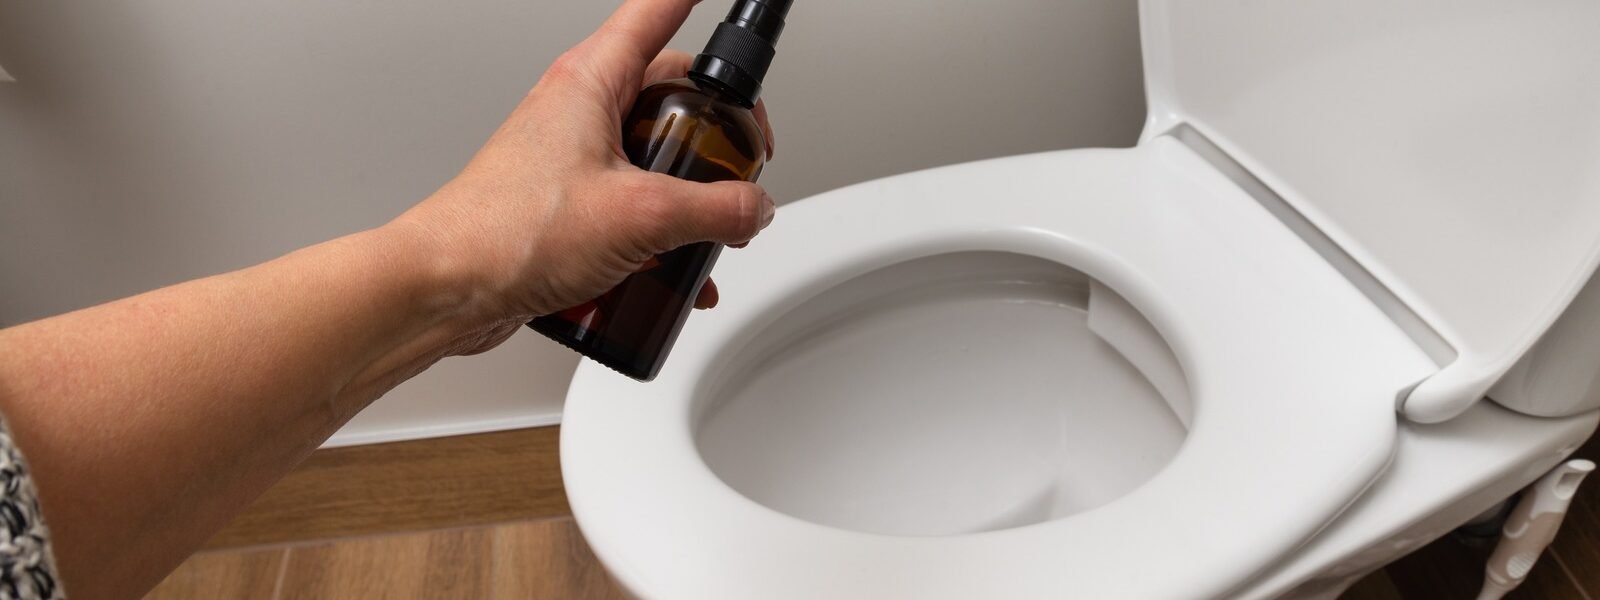 Popular Supplements That Can Make Your Poop Even Smellier - Health Digest